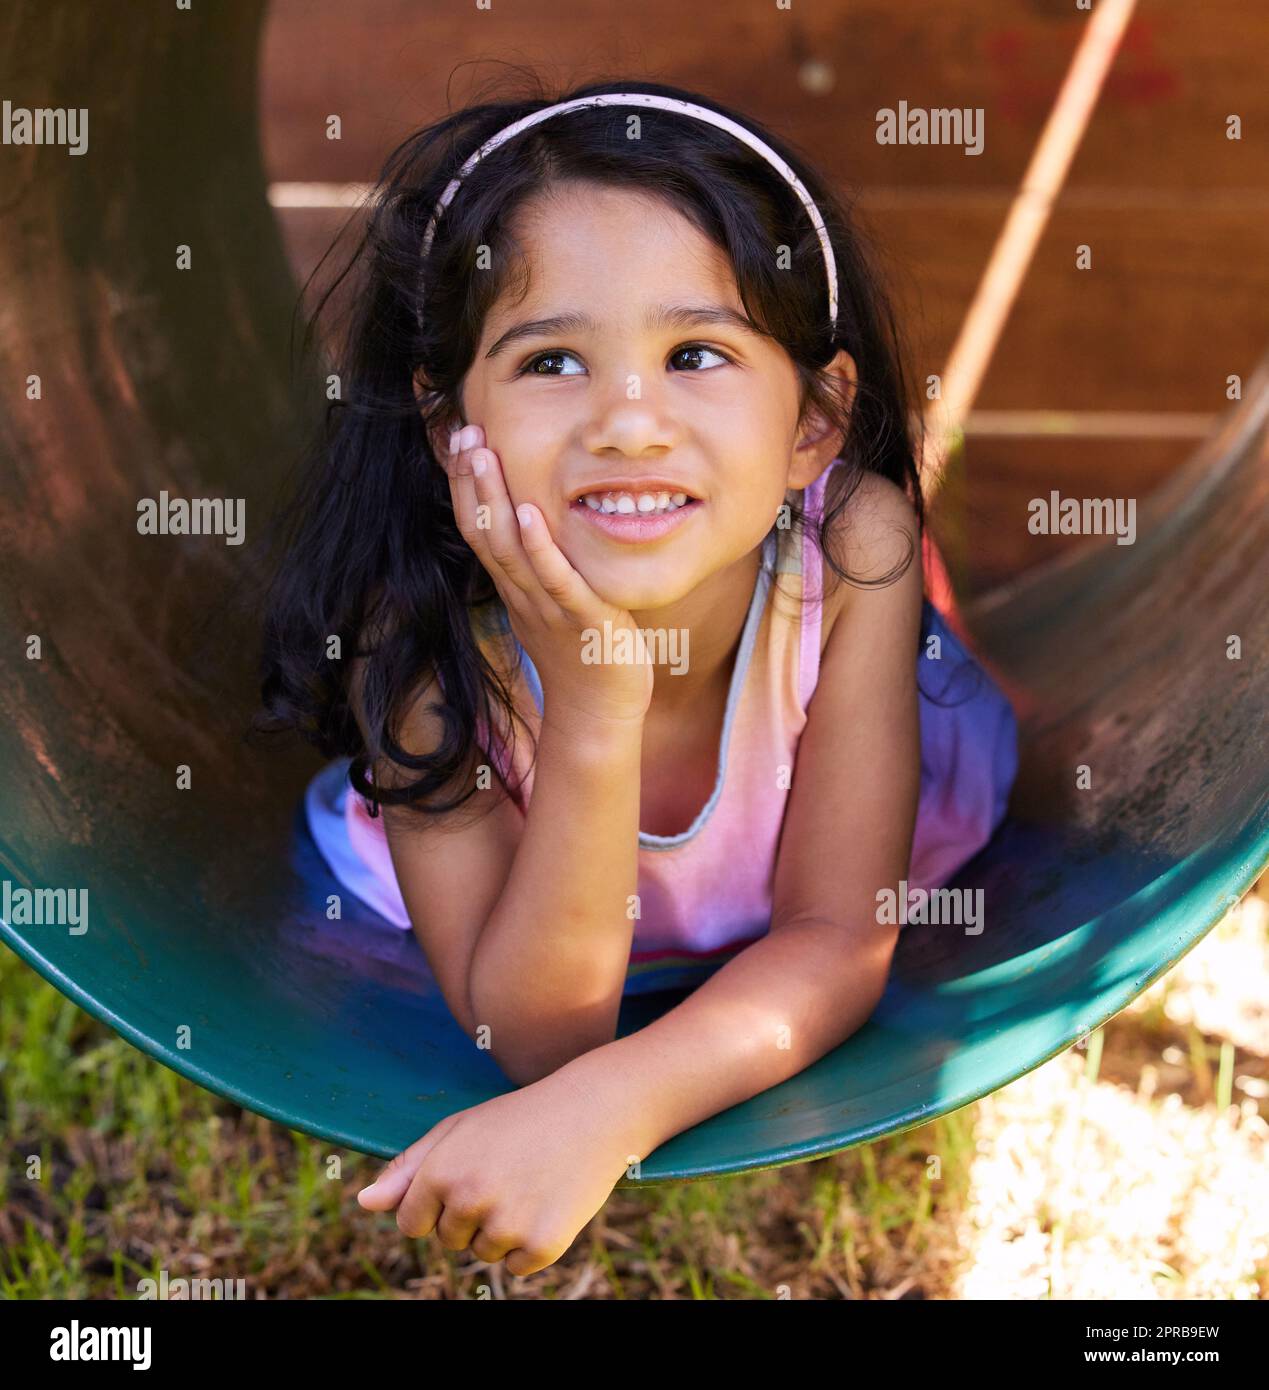 Whats on you mind little one. an adorable little girl spending time outside. Stock Photo